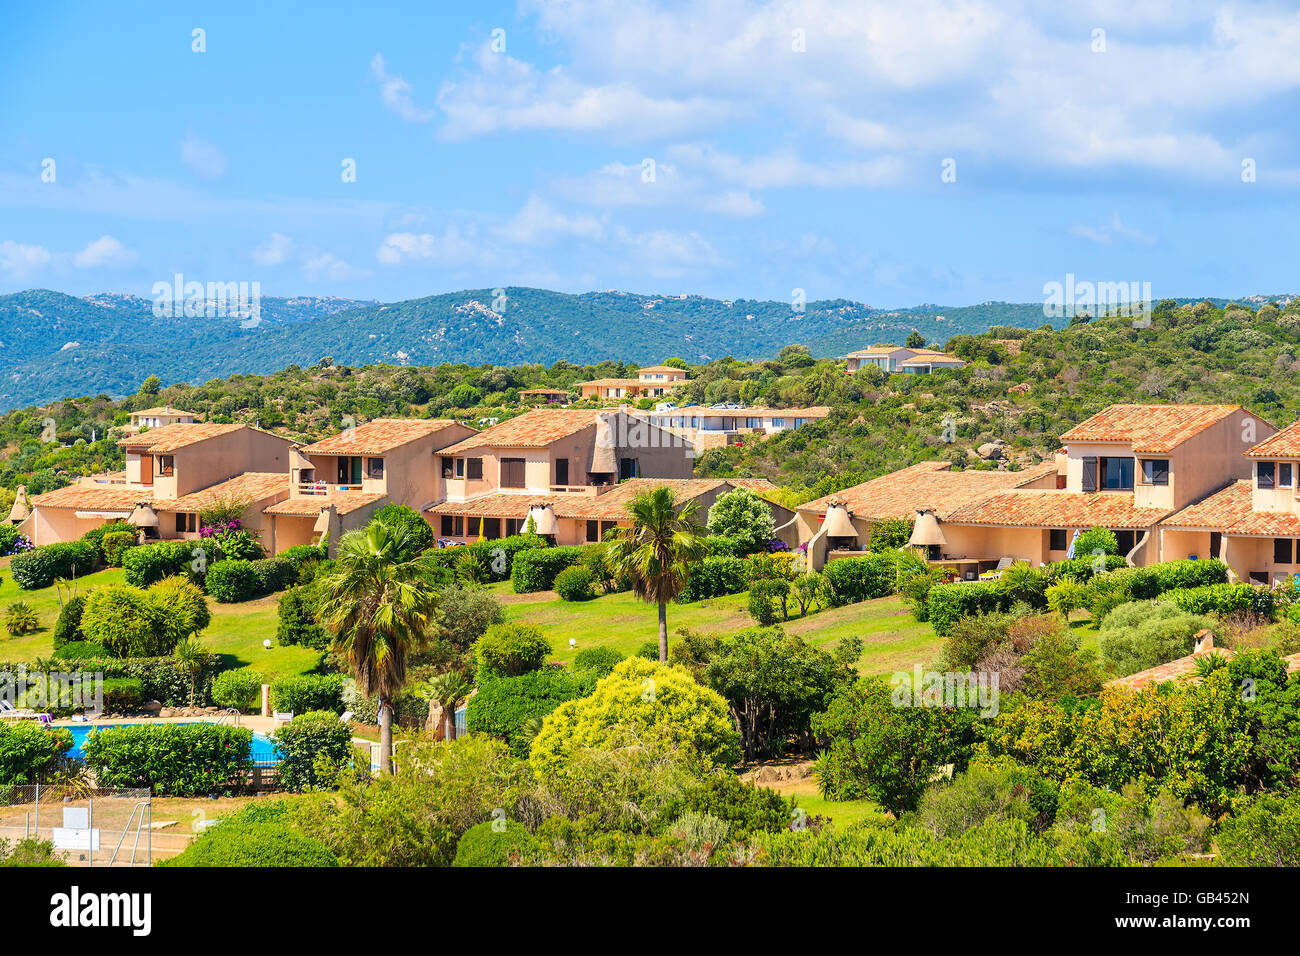 Typical Corsican villa houses on green hill in rural landscape of Corsica island, France Stock Photo